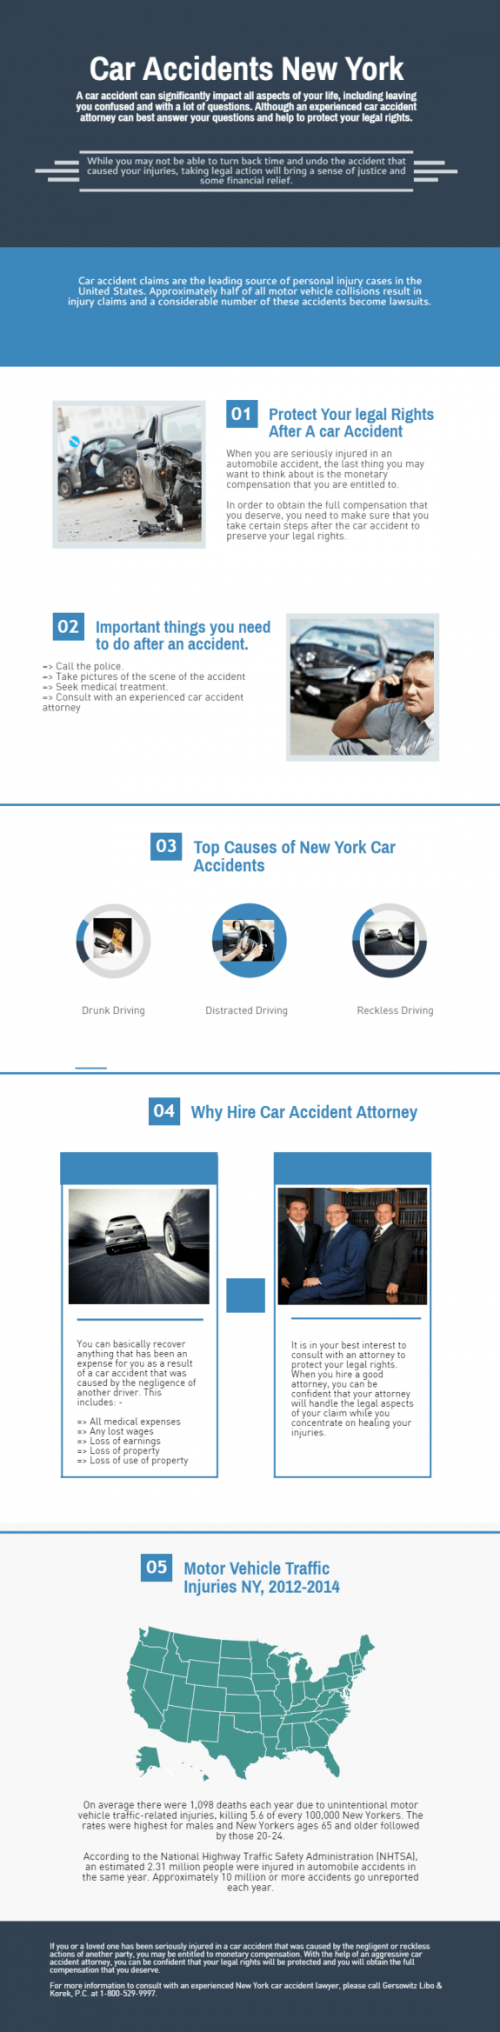 In United States, Car accident claims are the leading source of personal injury cases. After getting injured in a car accident, you need to obtain compensation you are entitled to. To get the full compensation you deserve, you need to consult an experienced car accidents attorney.

Source: https://www.lawyertime.com/car-accidents/